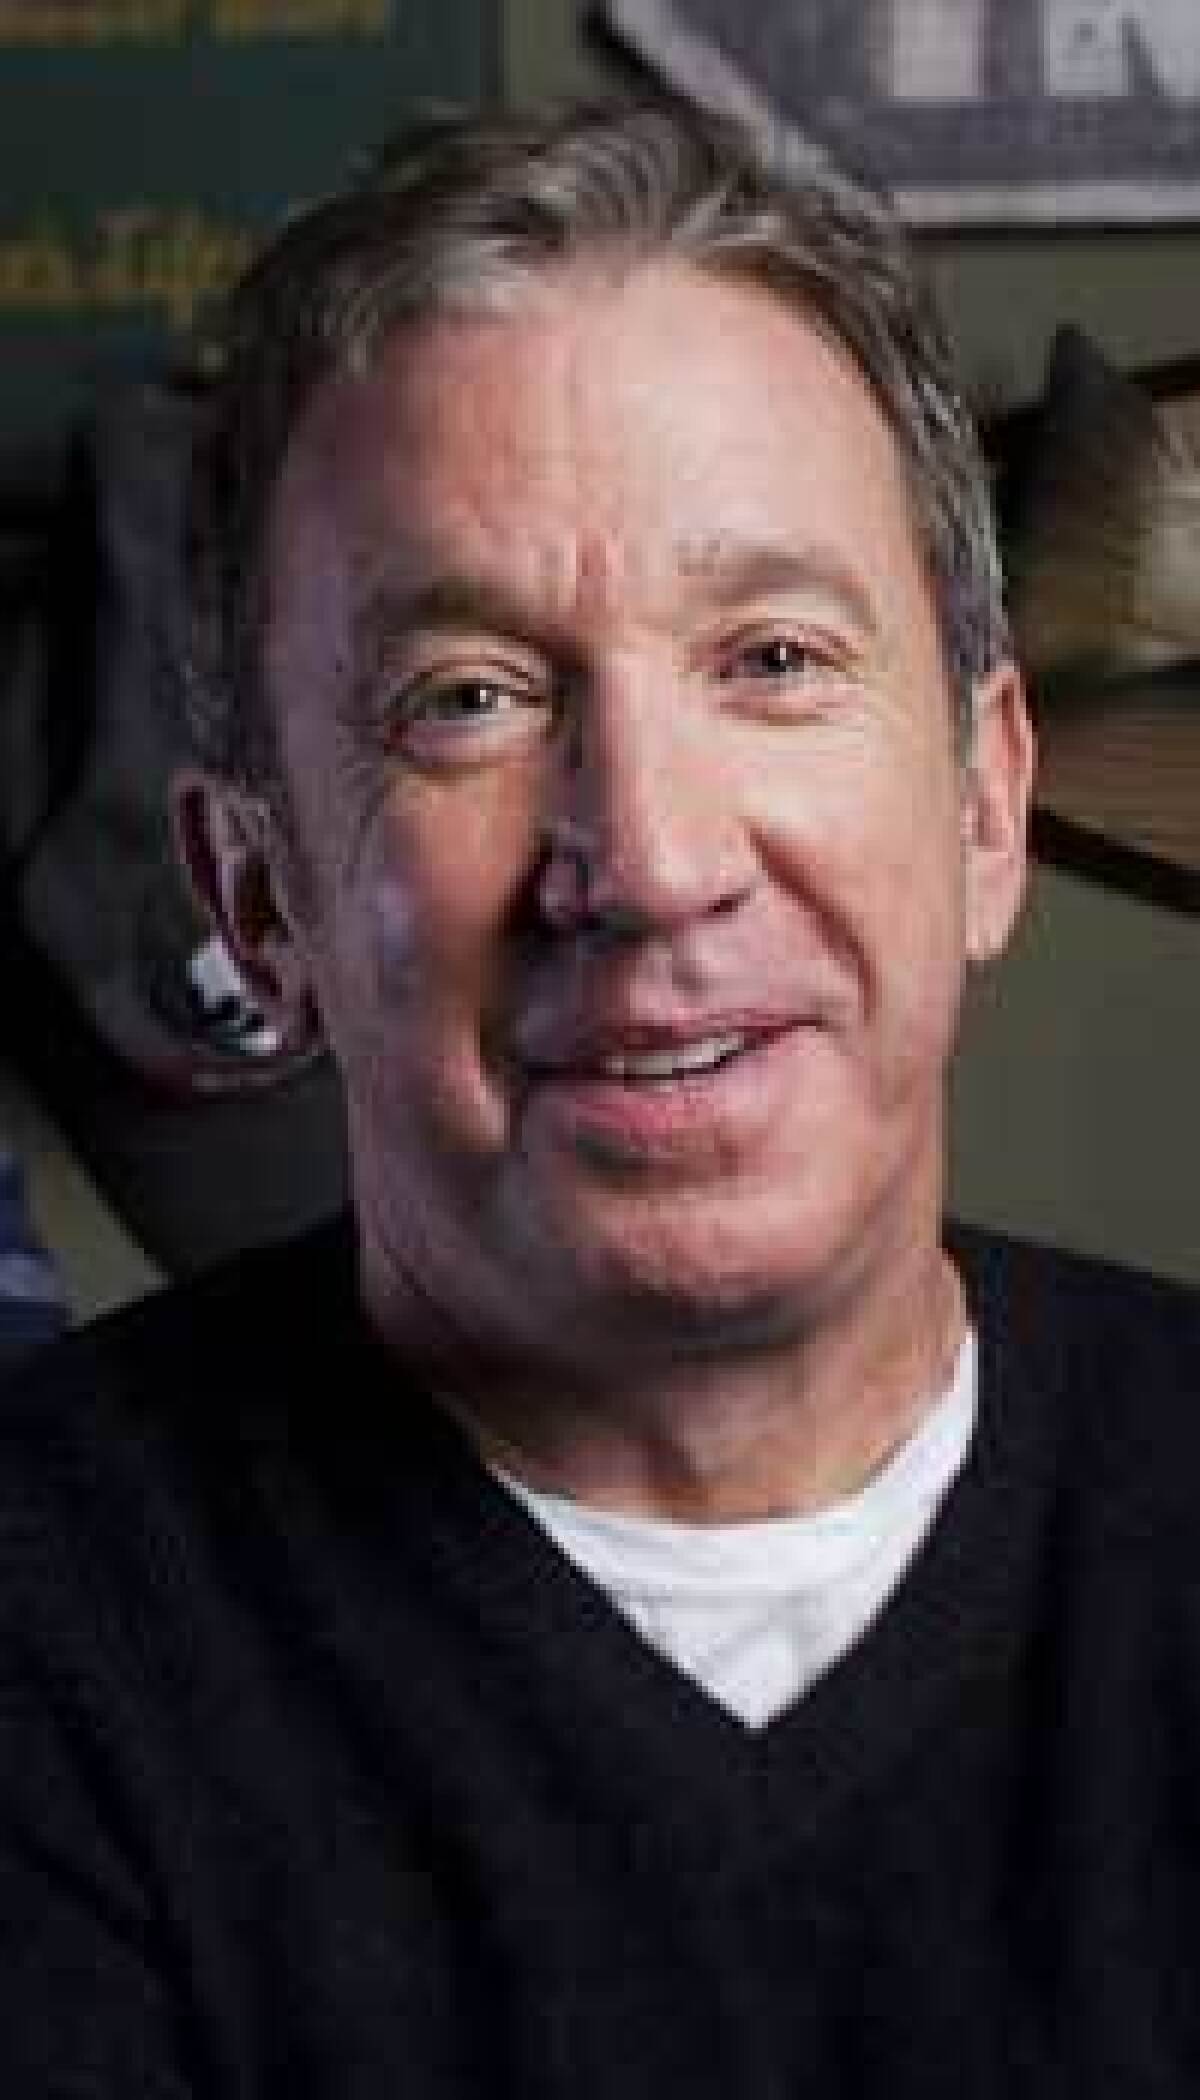 Actor Tim Allen is photographed in August 2011 on the set of his sitcom "Last Man Standing."